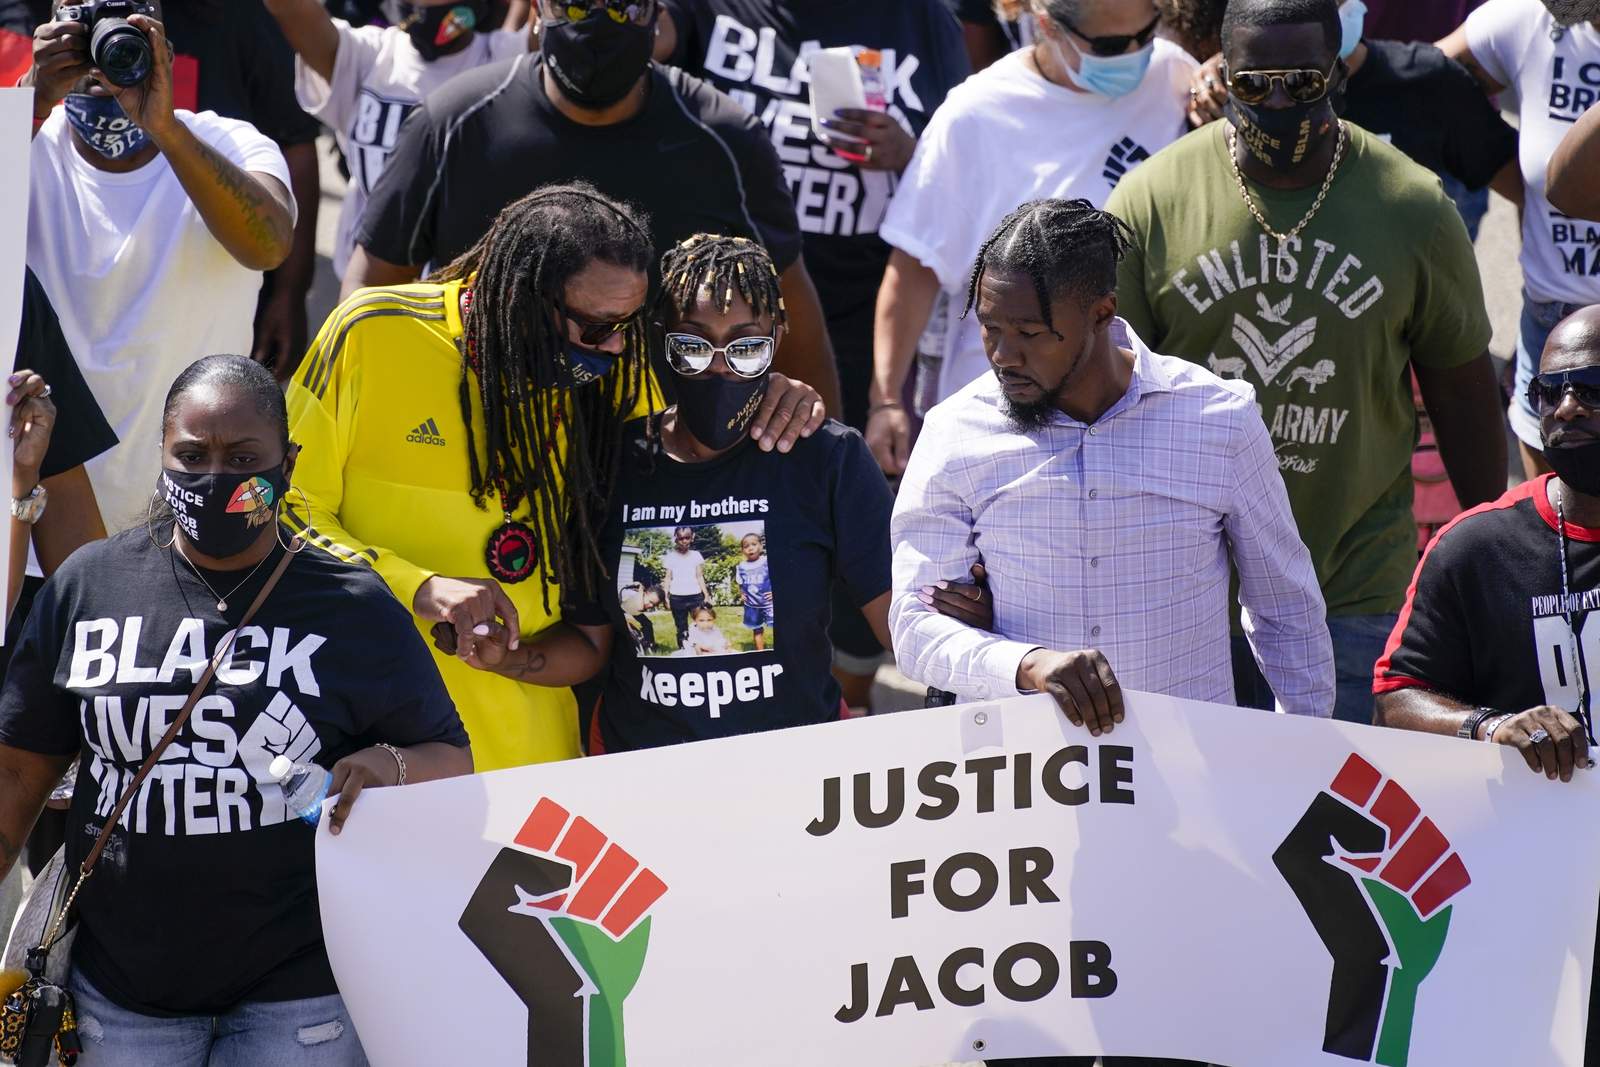 Absent details, police shooting narratives seek to distract